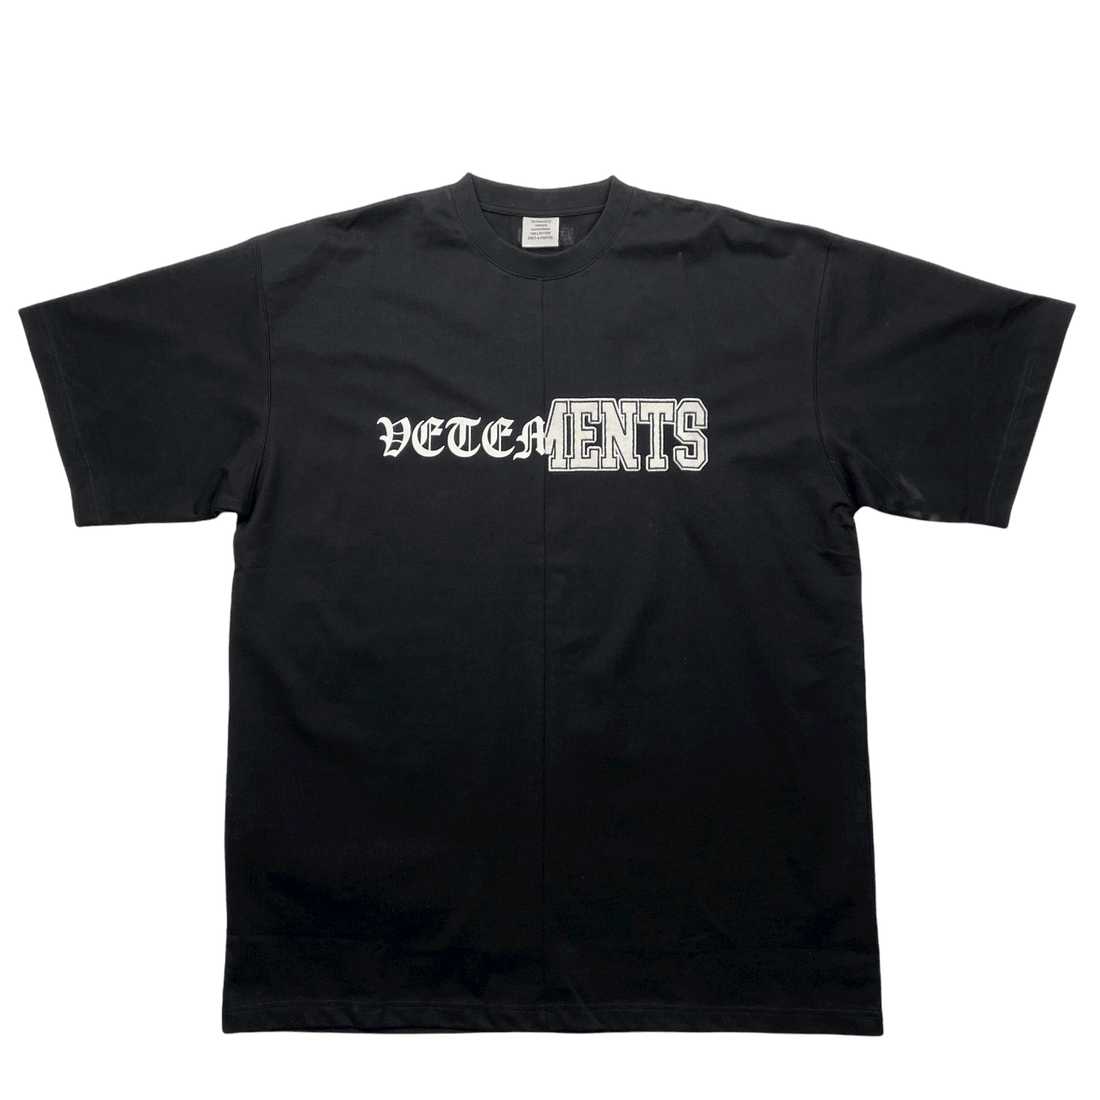 Black Vetements Oversized Vertical Cut Up Tee - Medium (Recommended Size - Extra Large) - The Streetwear Studio